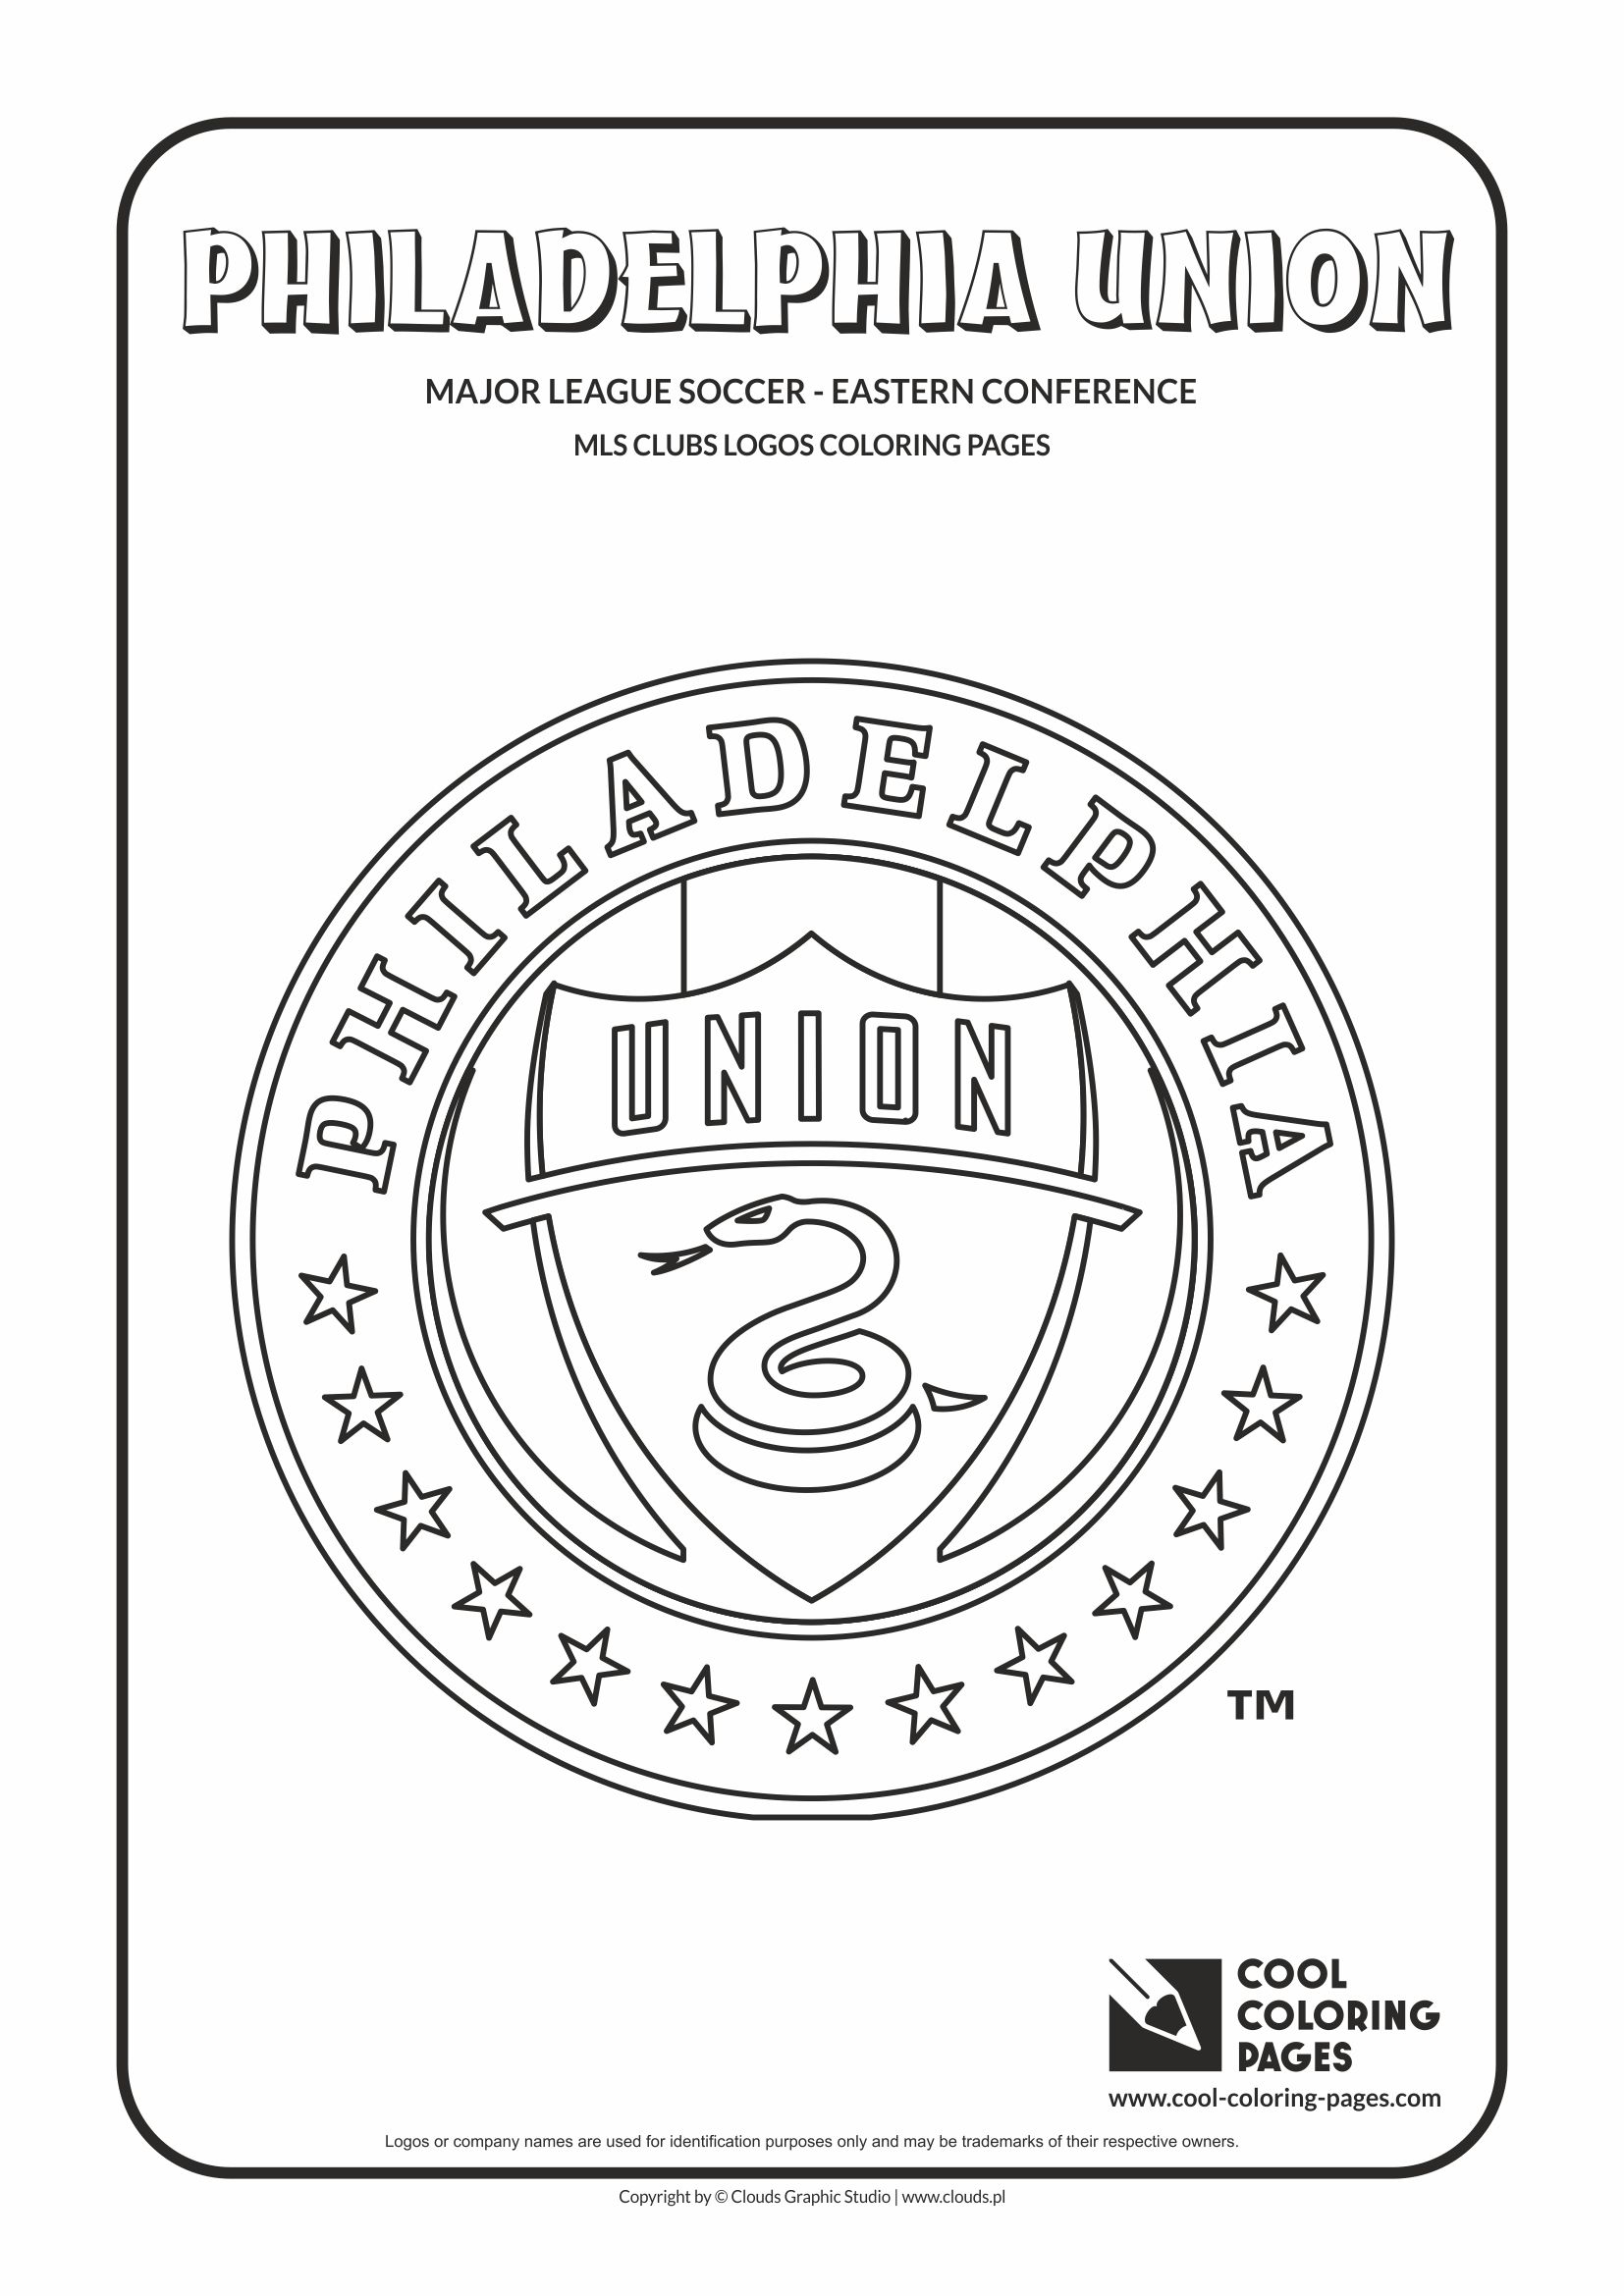 Cool Coloring Pages - Major League Soccer Logos - Eastern Conference / Philadelphia Union logo / Coloring page with Philadelphia Union logo